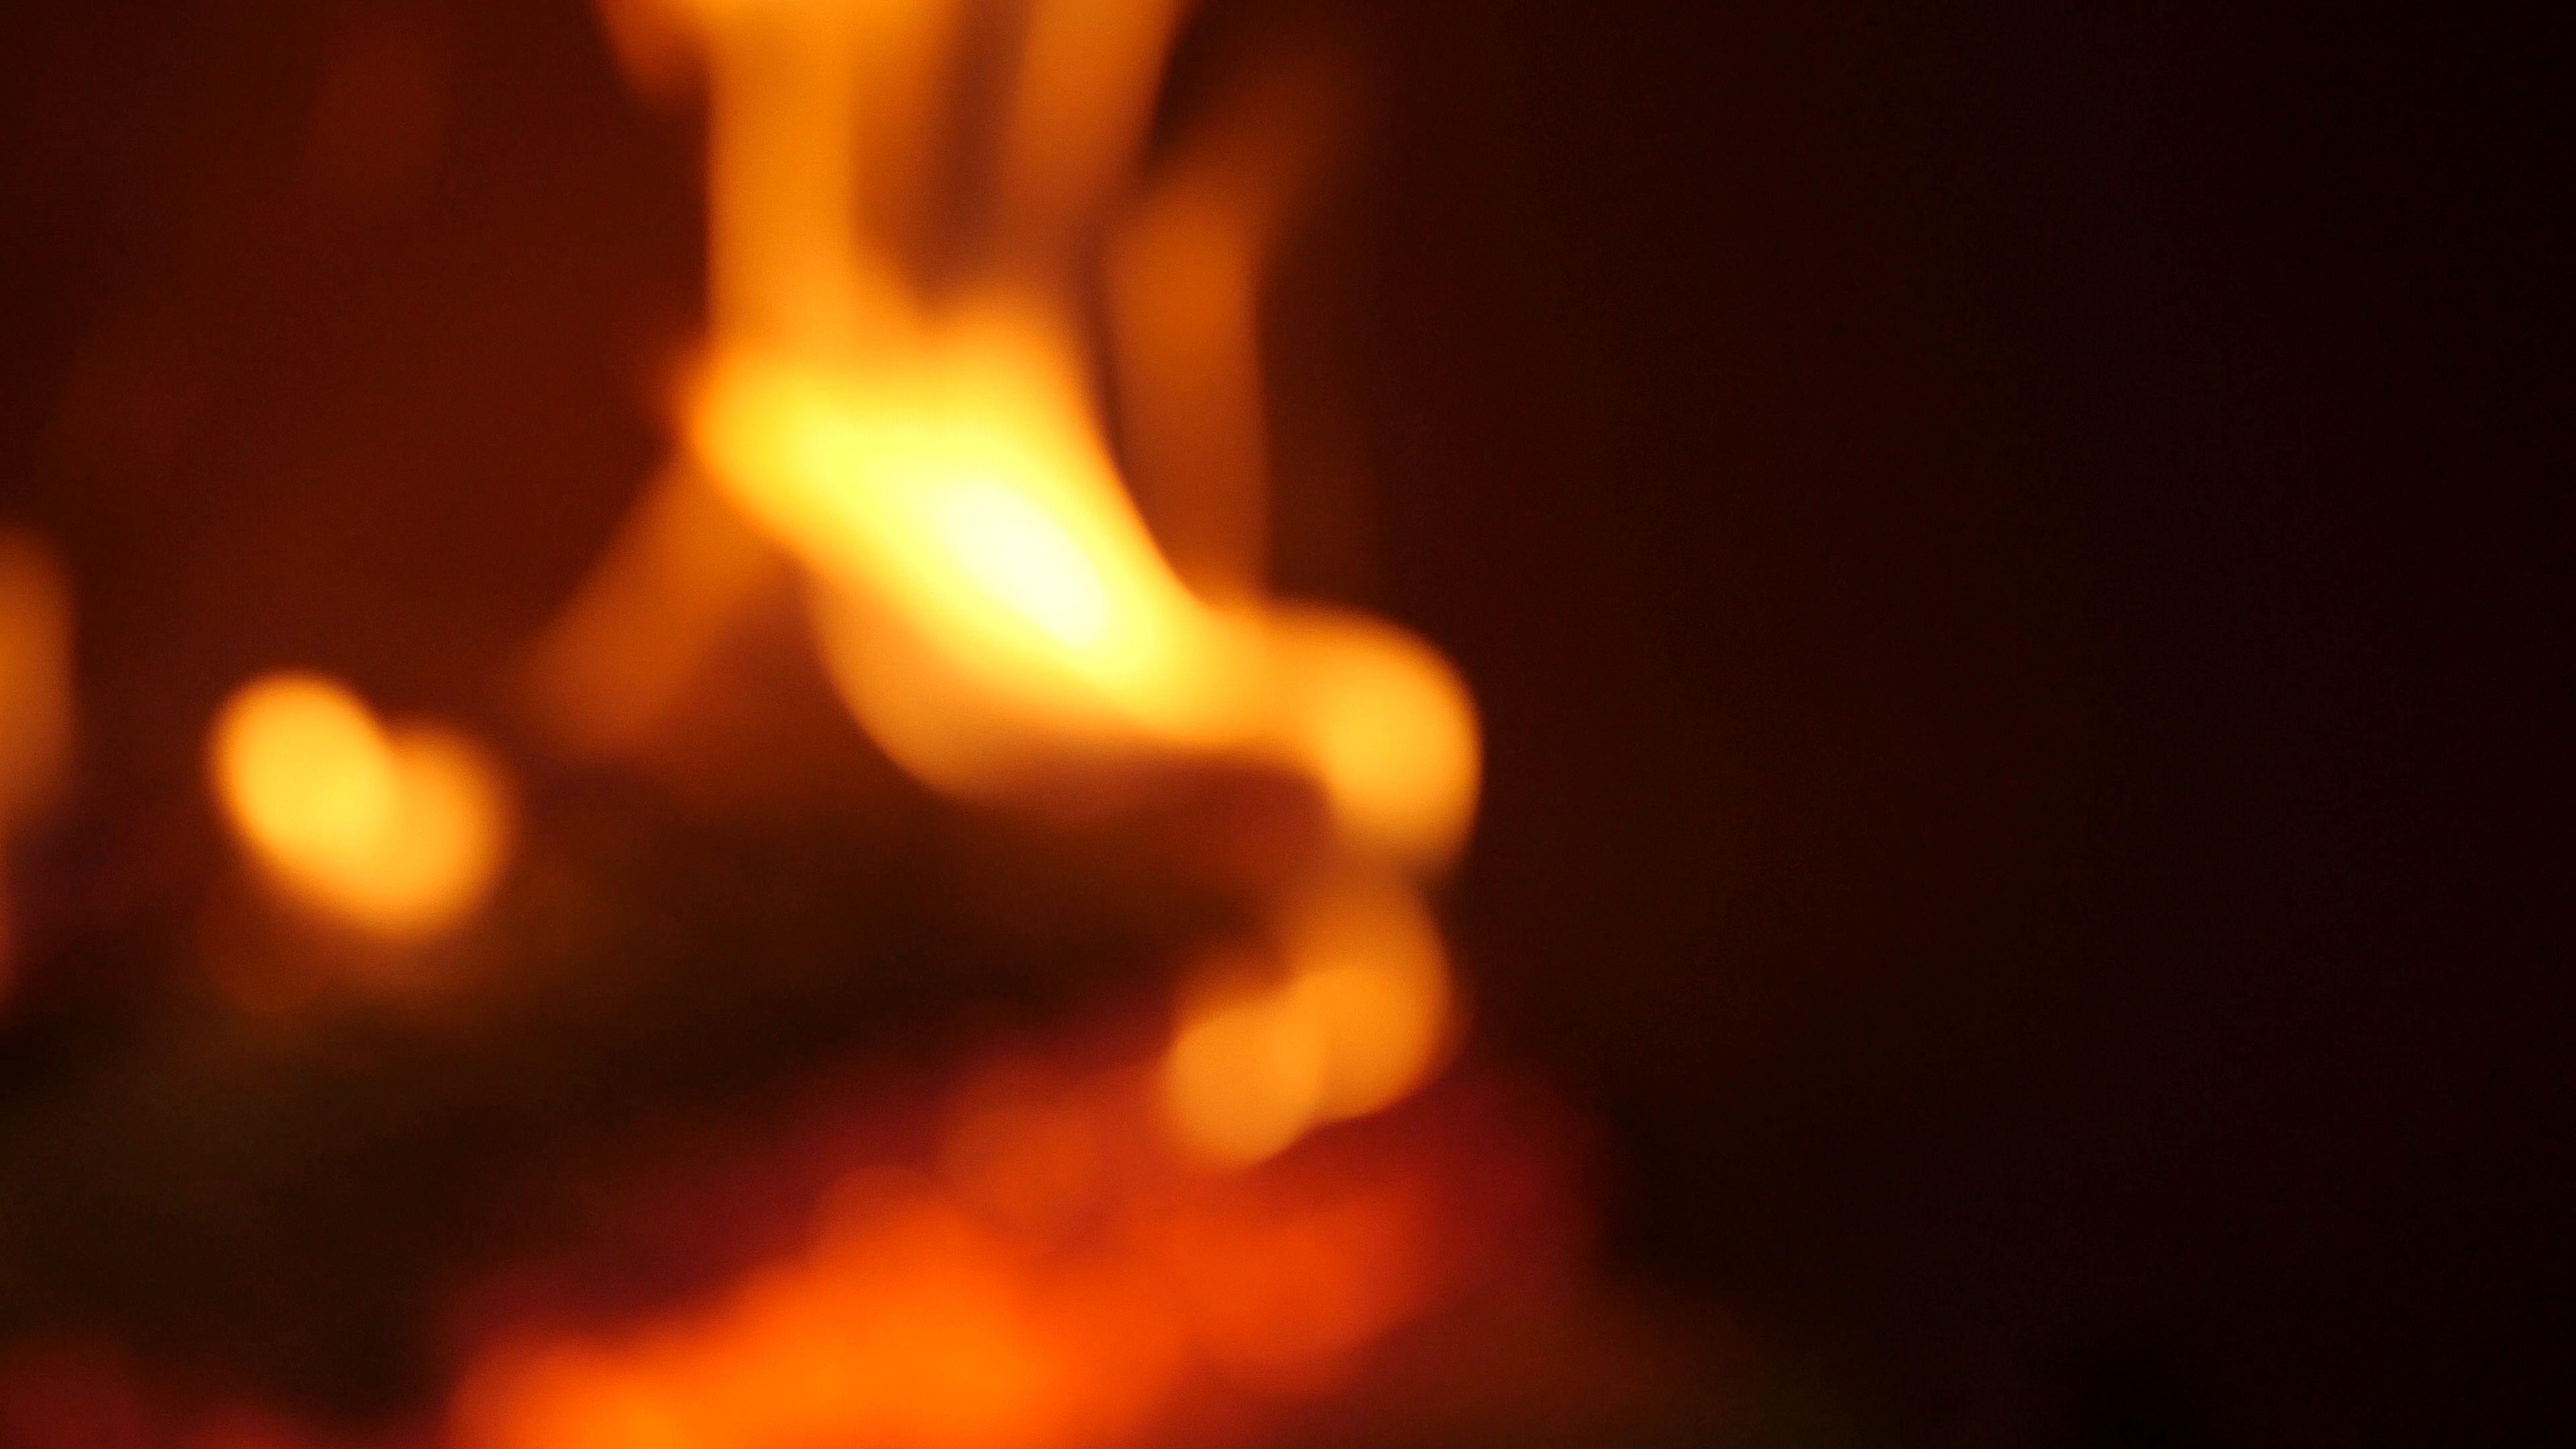 Video: Fire background. Fire in a pizza oven